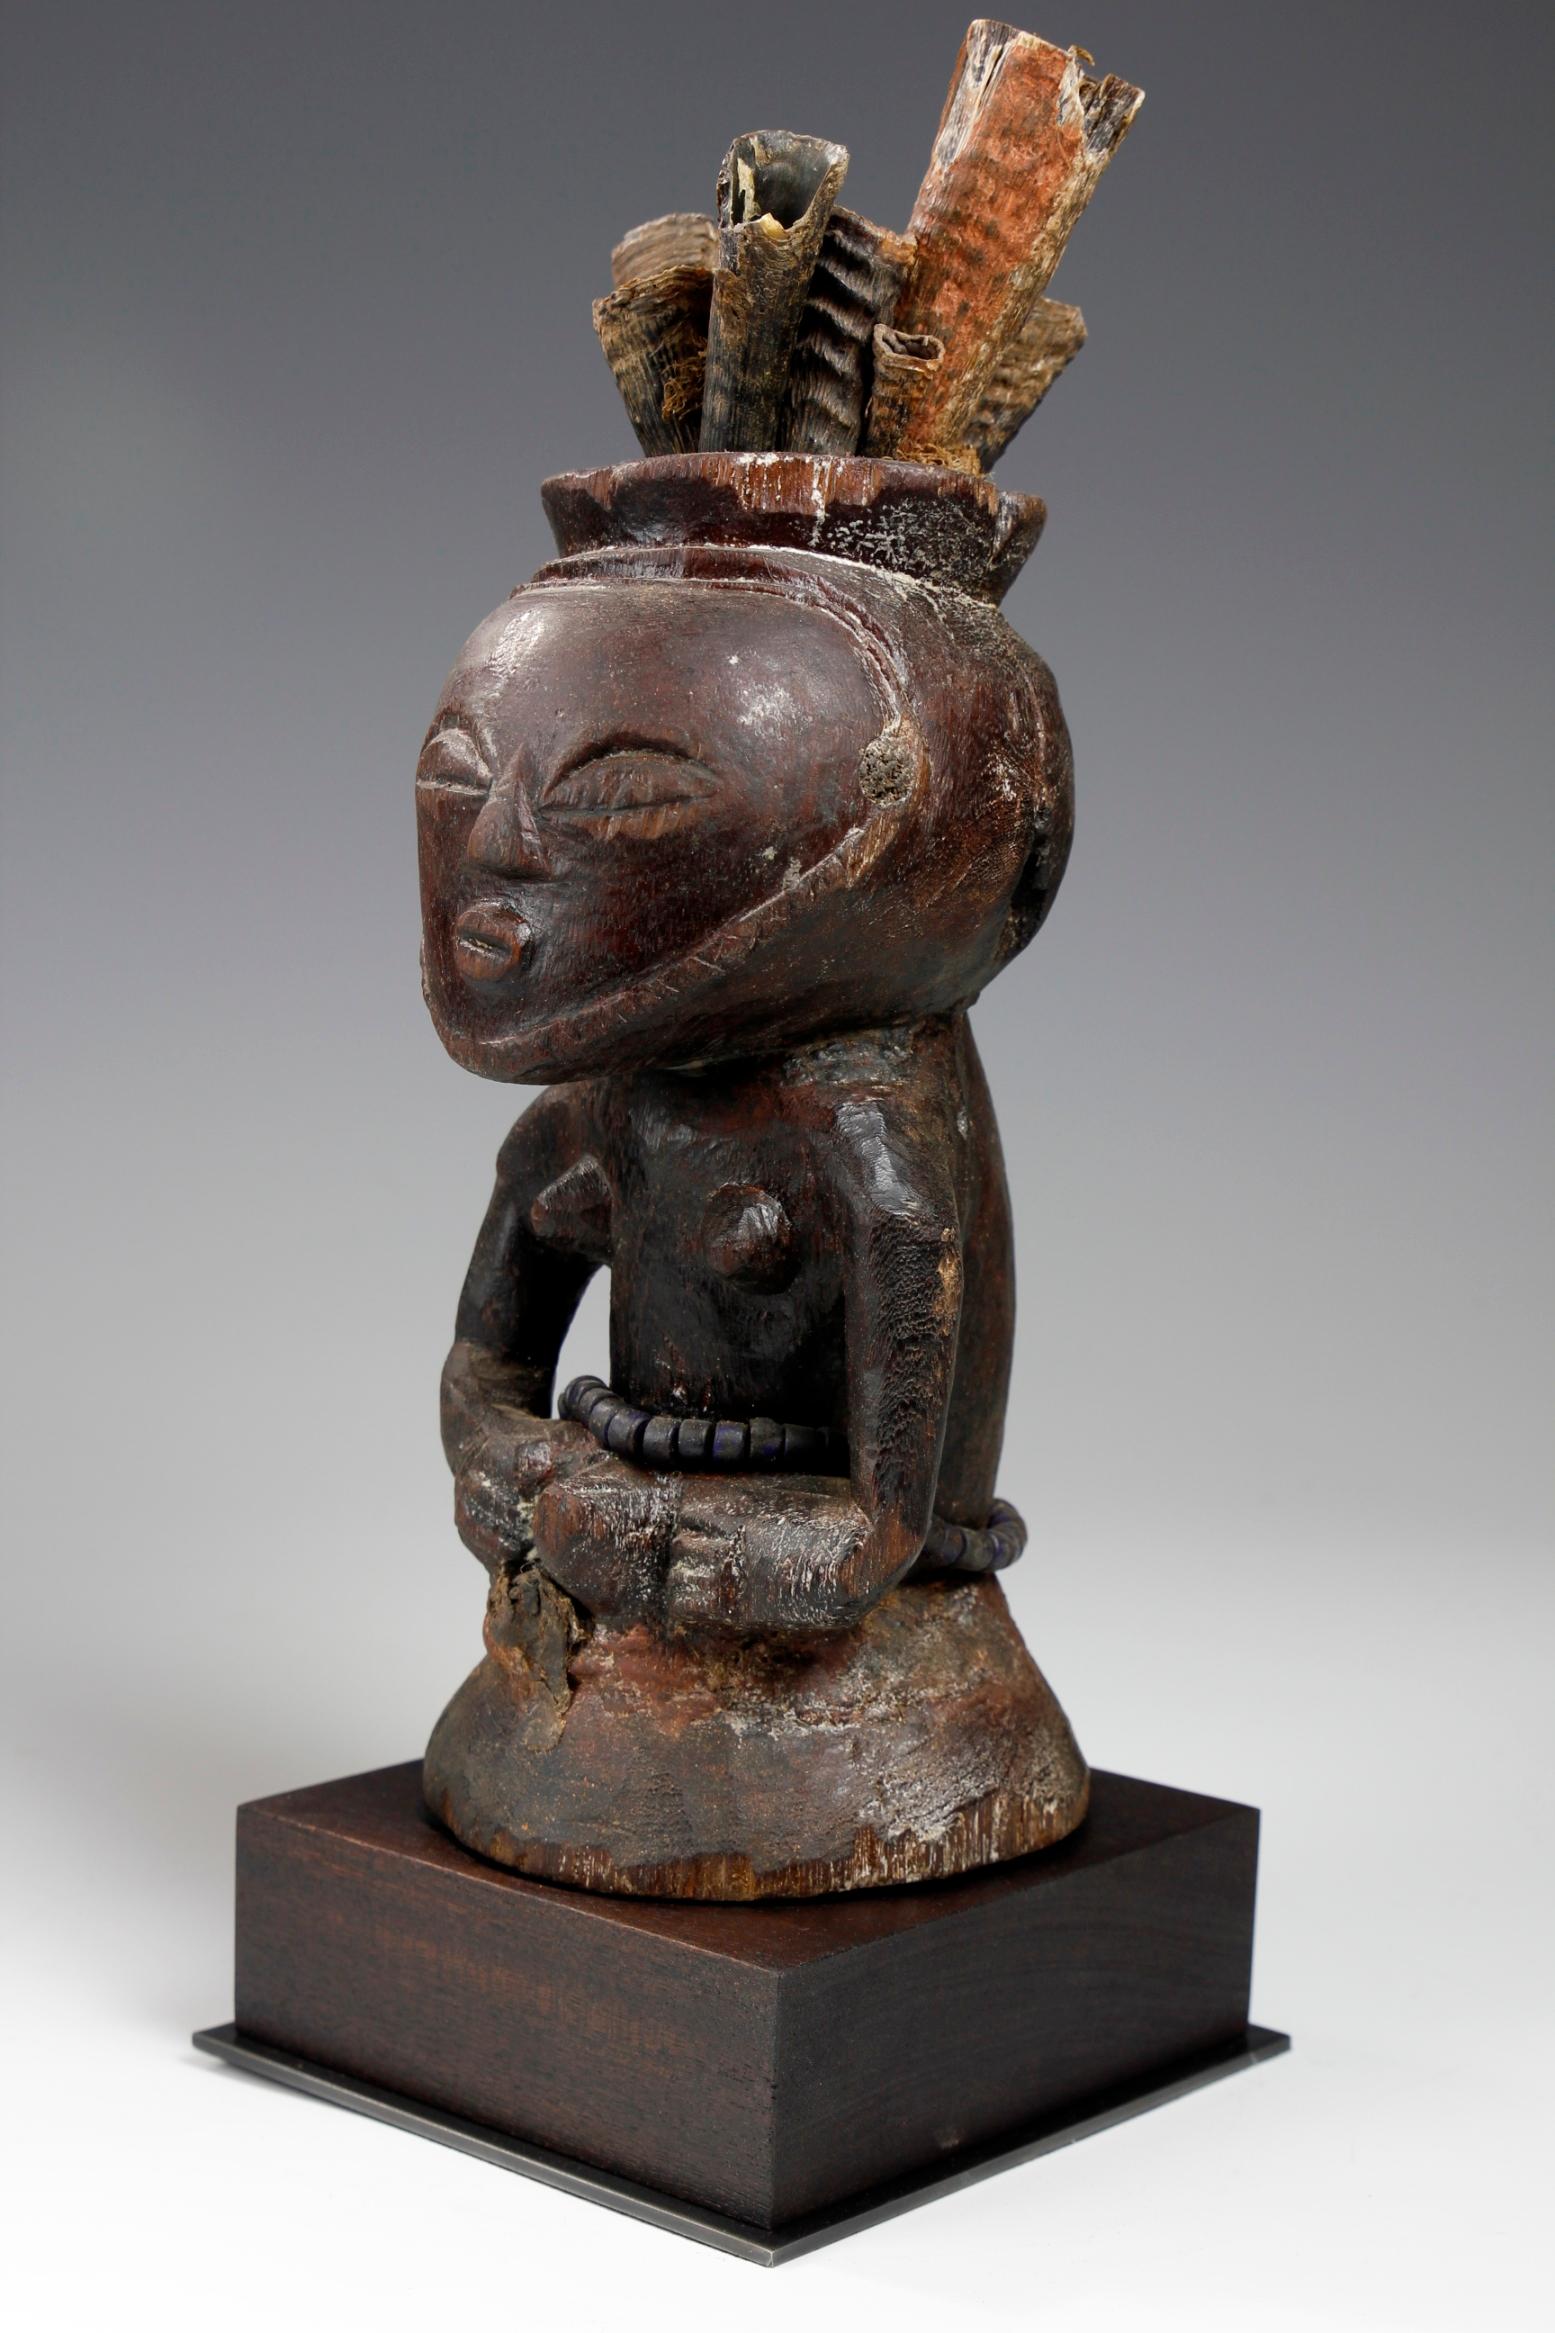 This fine fetish figure, from the Luba/Kusu culture in the Democratic Republic of the Congo, dates back to the early twentieth-century or before, to the nineteenth-century. The carved figure displays a pronounced head,  exaggerated in size with a